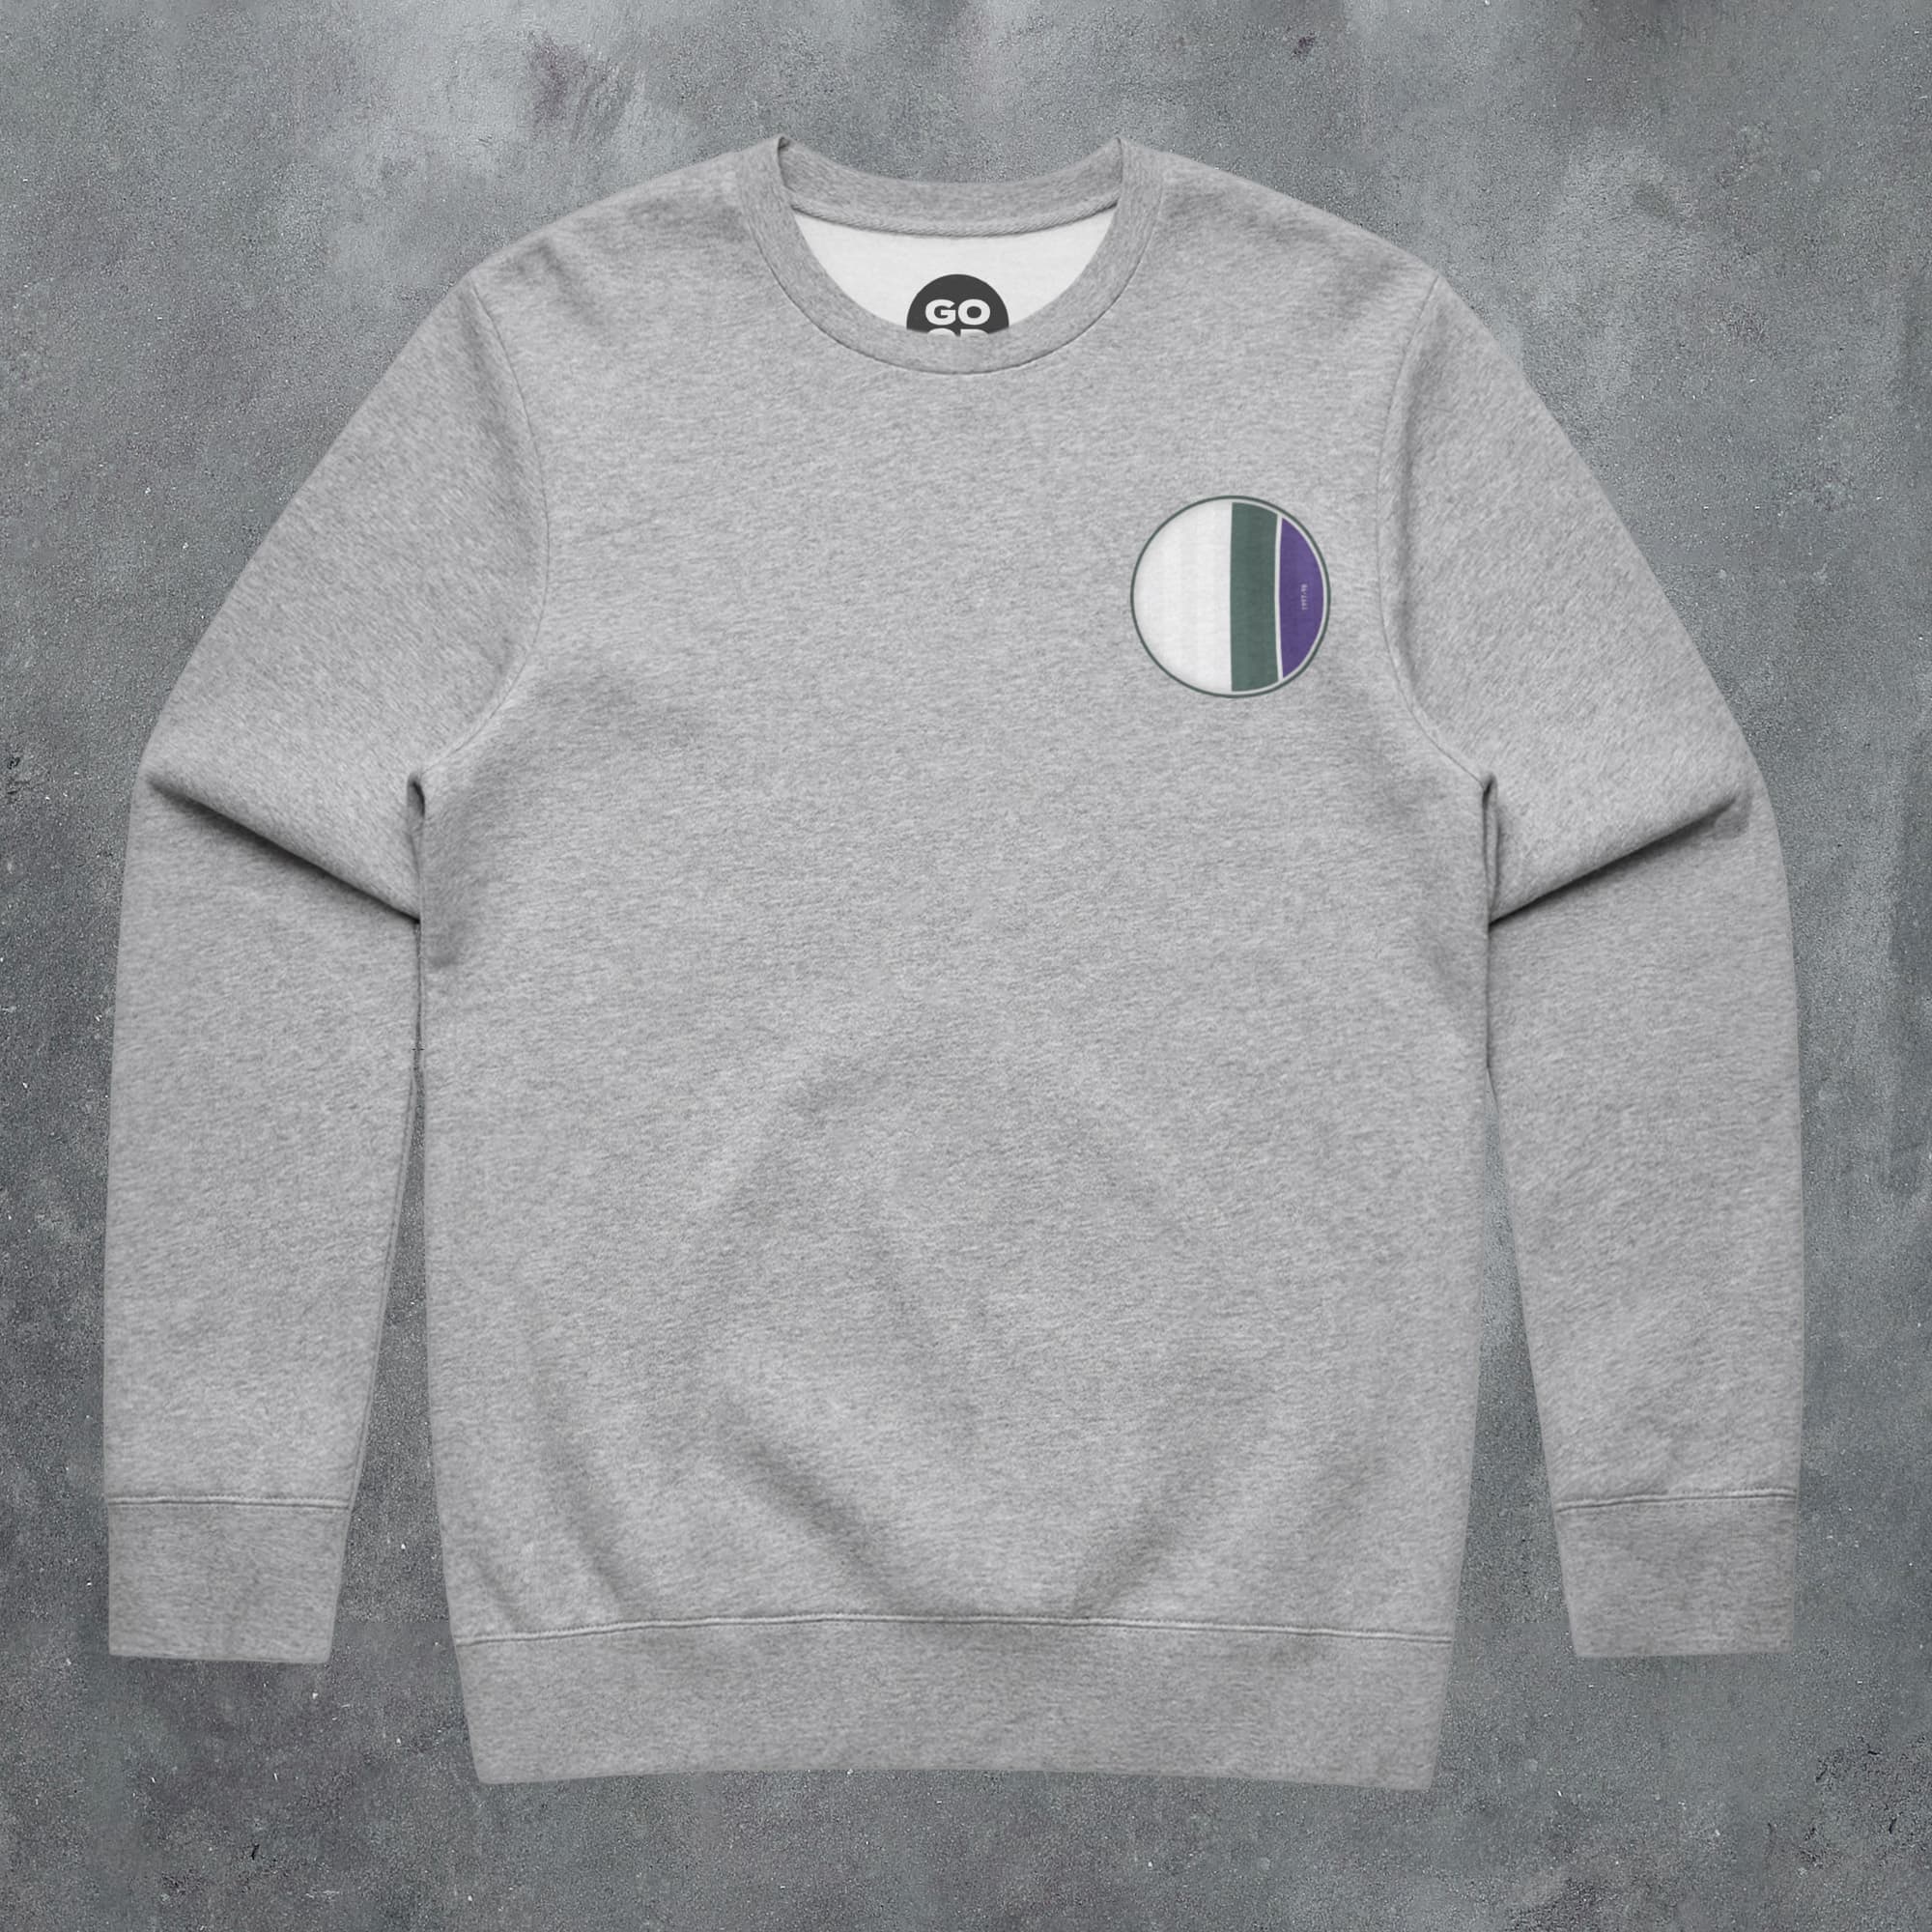 a grey sweatshirt with a green, white and blue patch on the chest